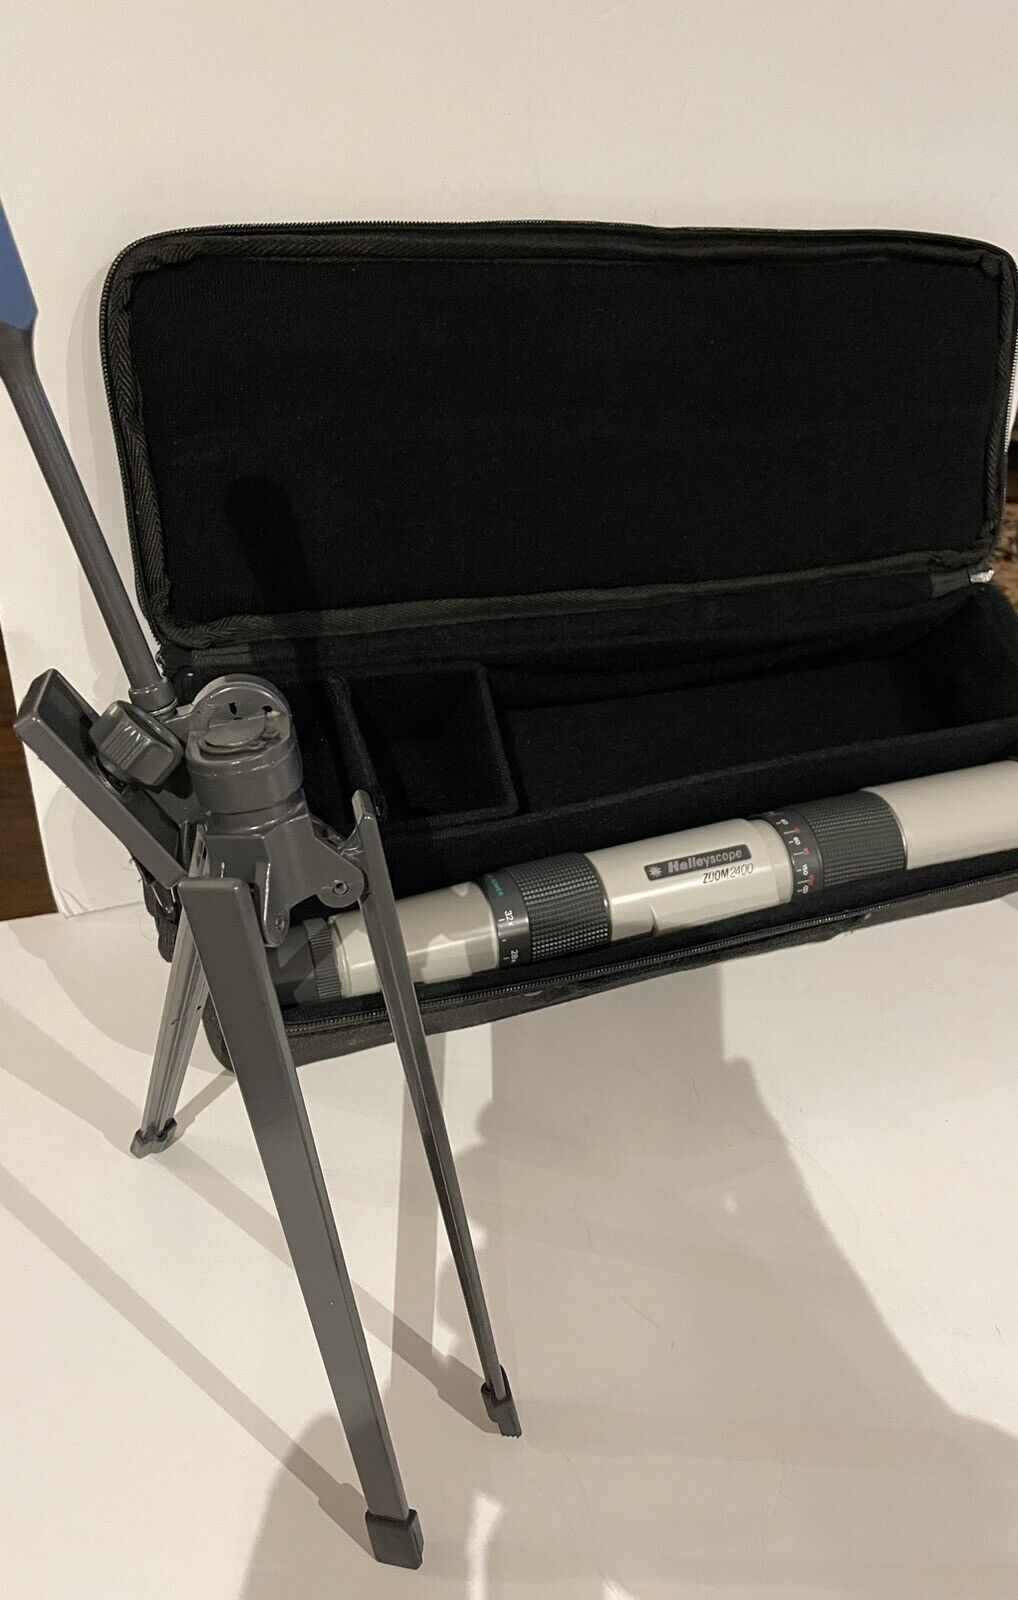 Halleyscope Zoom 2400 with Stand & Carrying Case